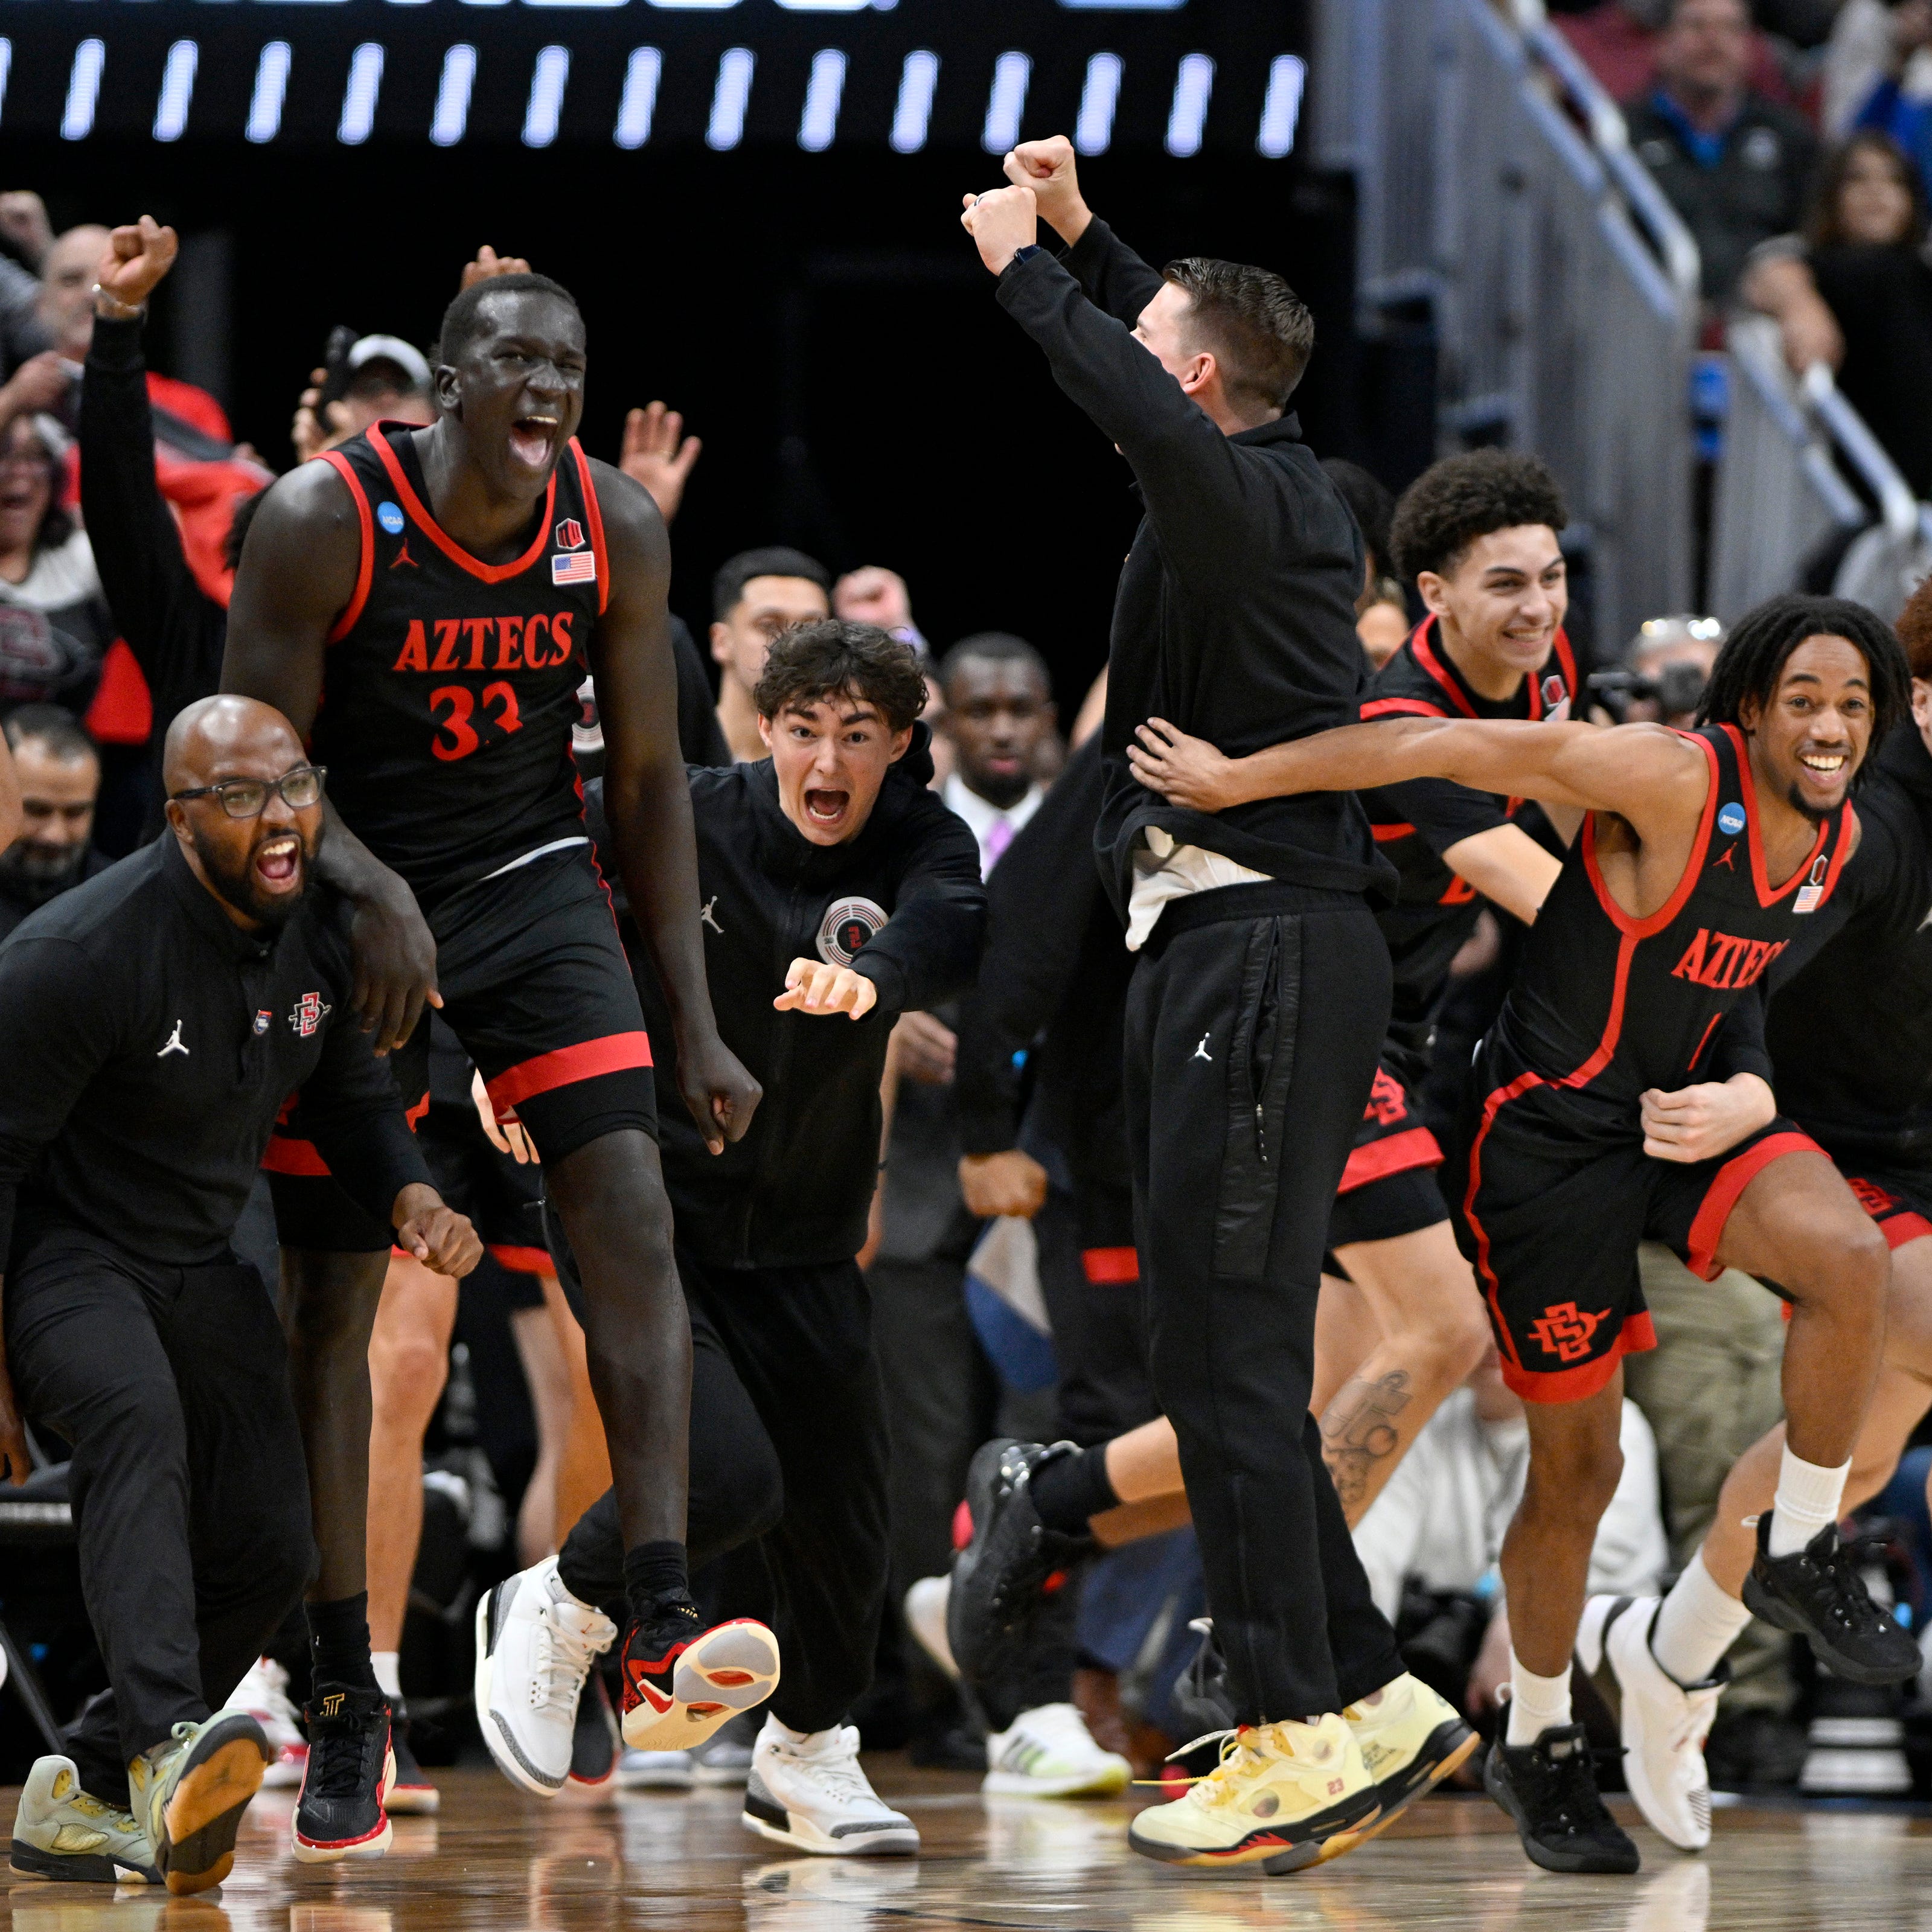 San Diego State players celebrate after defeating Alabama in the Sweet 16.